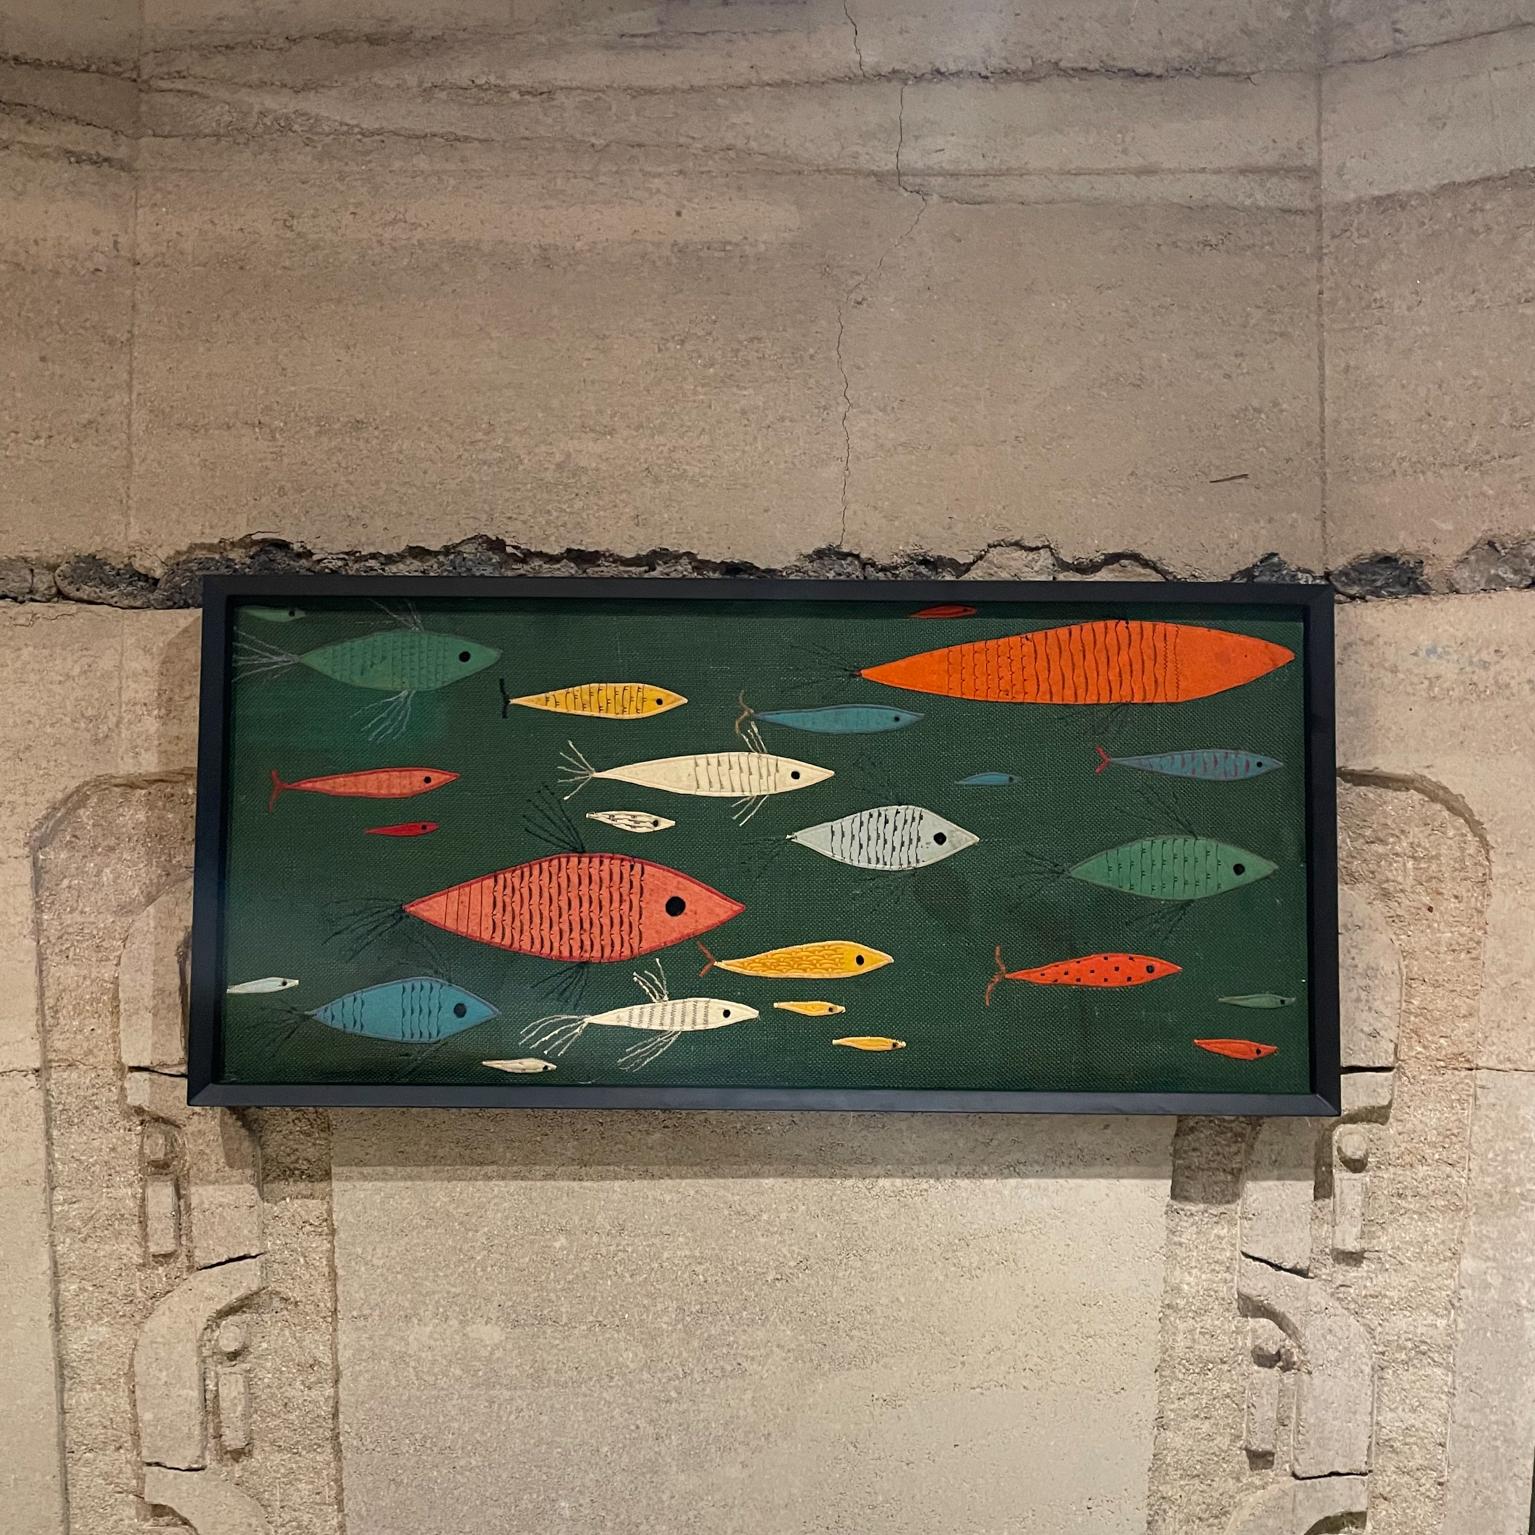 Art
Mid-Century Modern colorful school of fish art wall tapestry framed in black.
Measures: 20H x 43 W x 1.5 D.
Preowned original unrestored vintage condition.
Please review images provided.